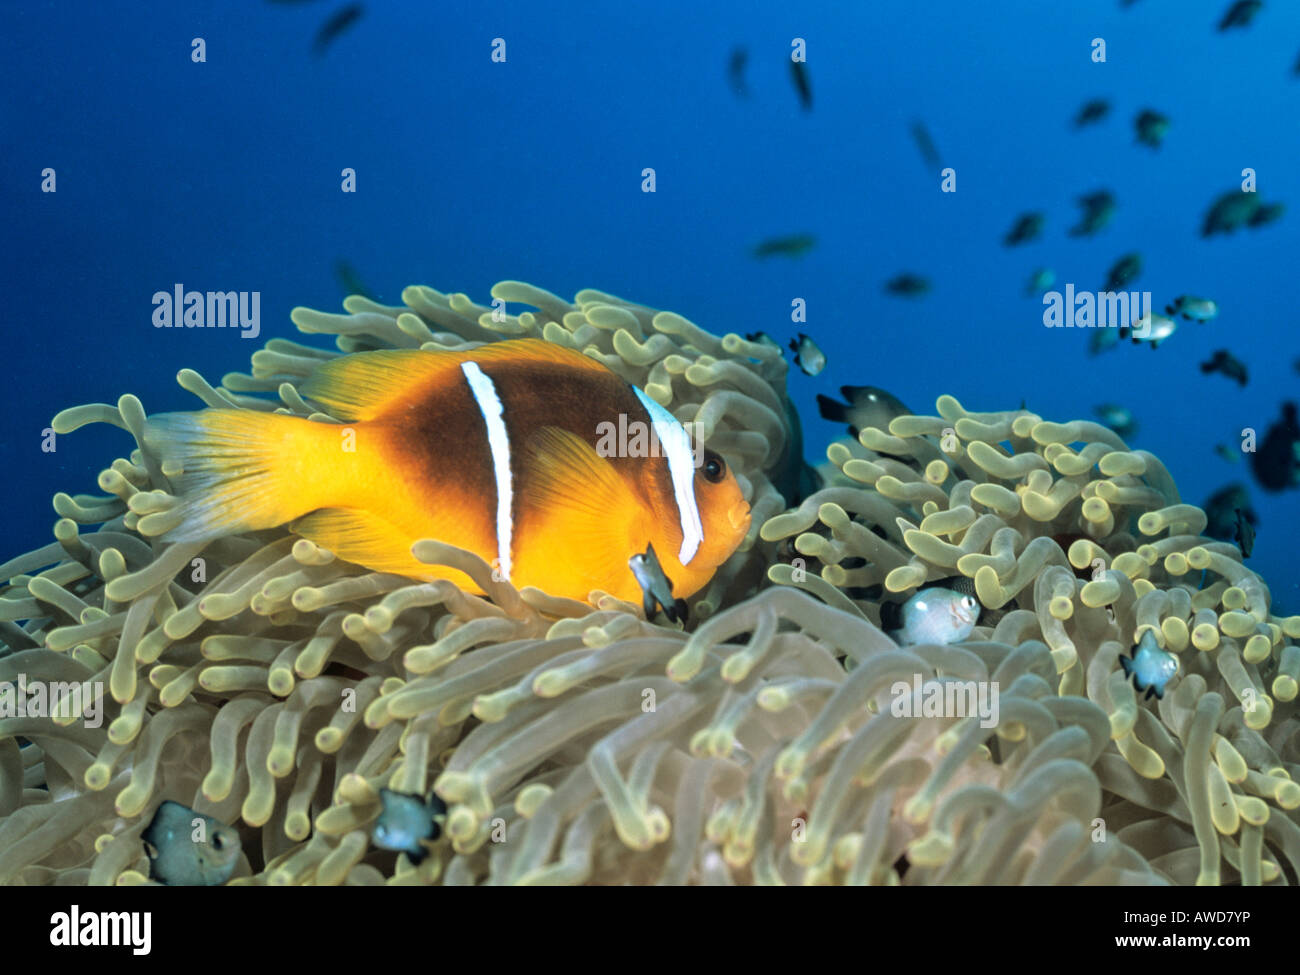 Red Sea Clownfish or Red Sea Anemonefish or Twoband Anemonefish (Amphiprion bicinctus) and Sea Anemone (Actiniaria), symbiosis, Stock Photo